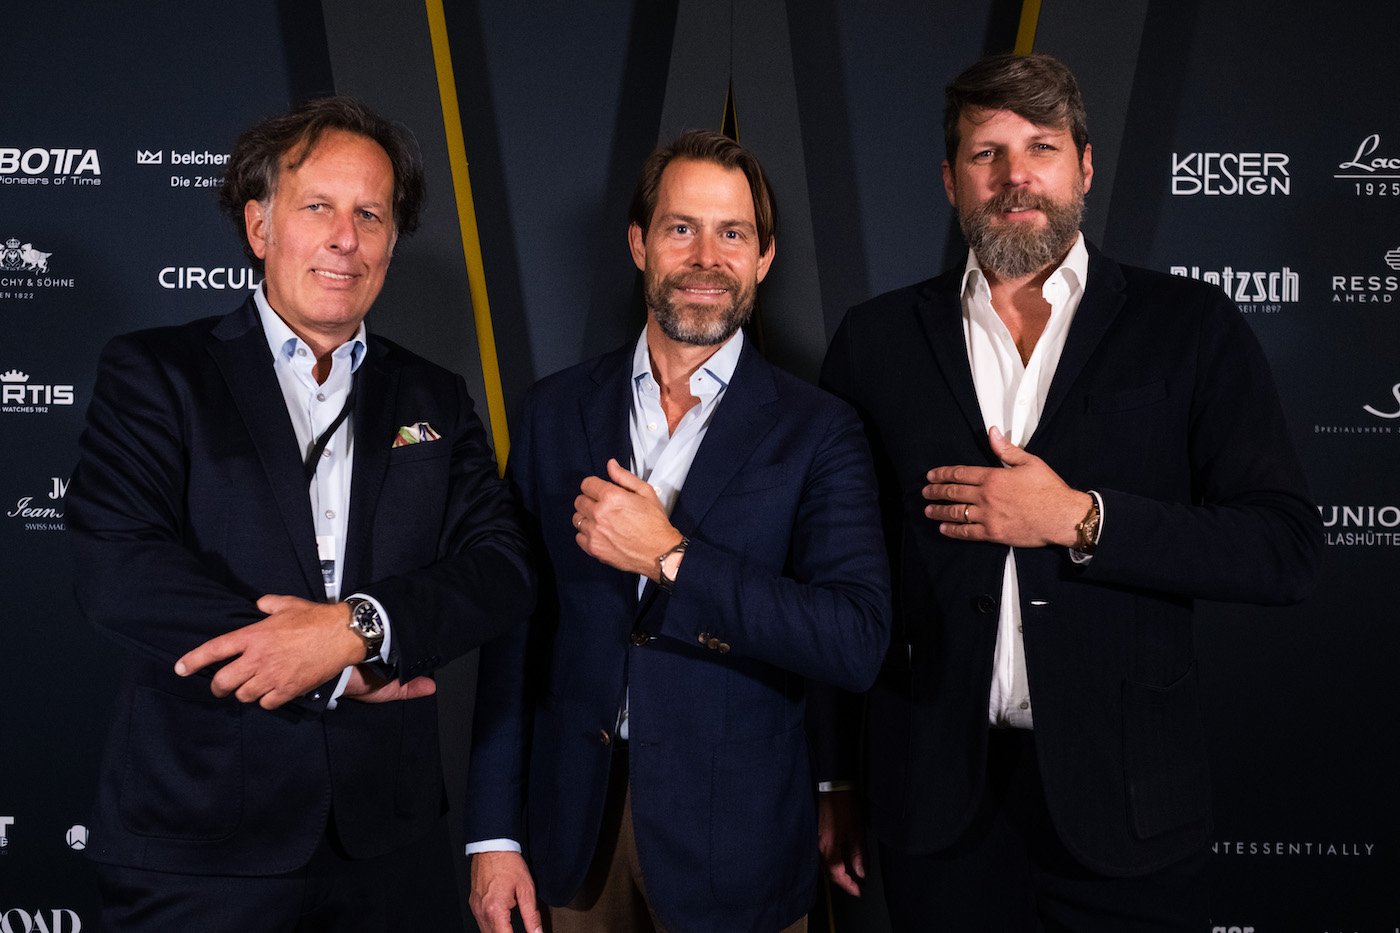 WatchTime Düsseldorf claims success for its new edition